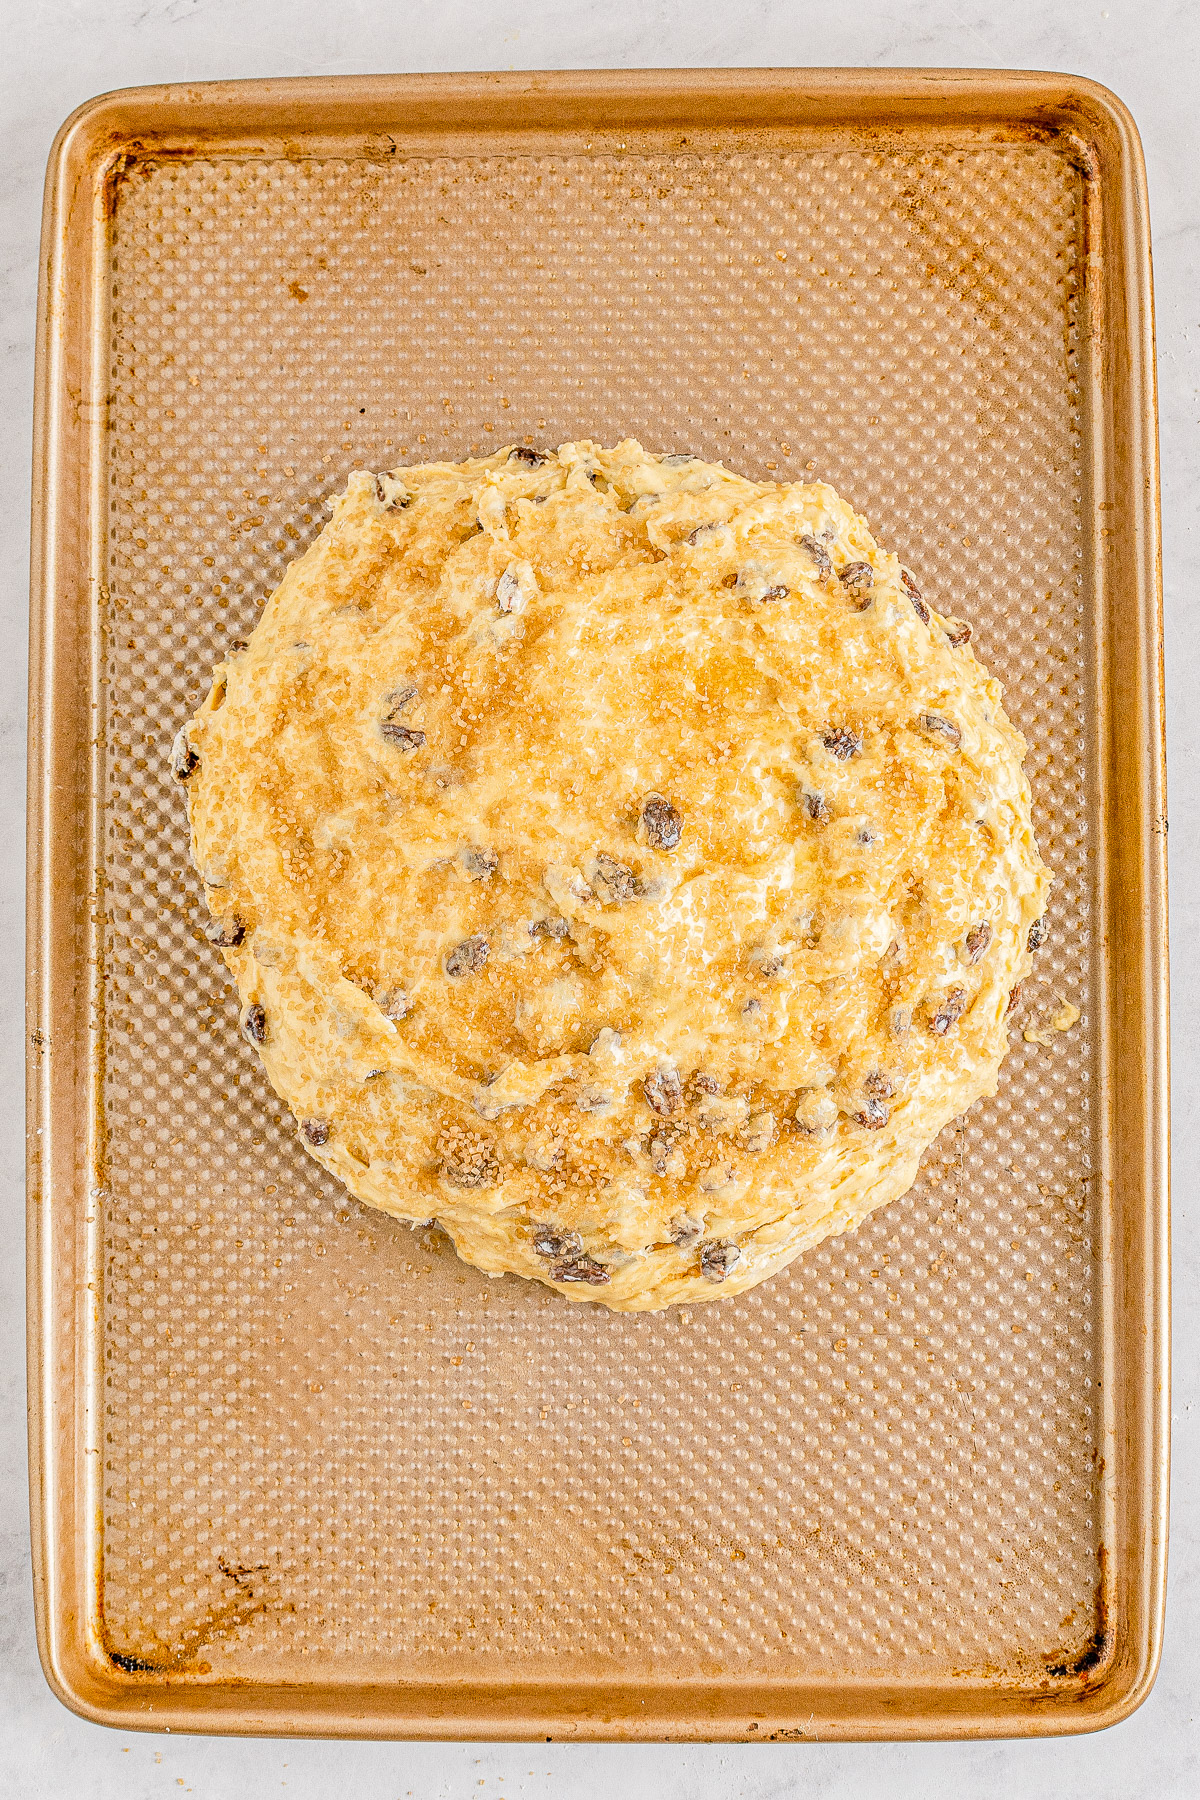 Easy Irish Soda Bread - A FAST, EASY, and foolproof recipe for classic Irish soda bread with an optional but fabulous twist of Irish whiskey-soaked raisins! A lightly sweetened crunchy crust with a soft interior, you'll want to make this quick bread recipe year round and not just for Saint Patrick's Day!